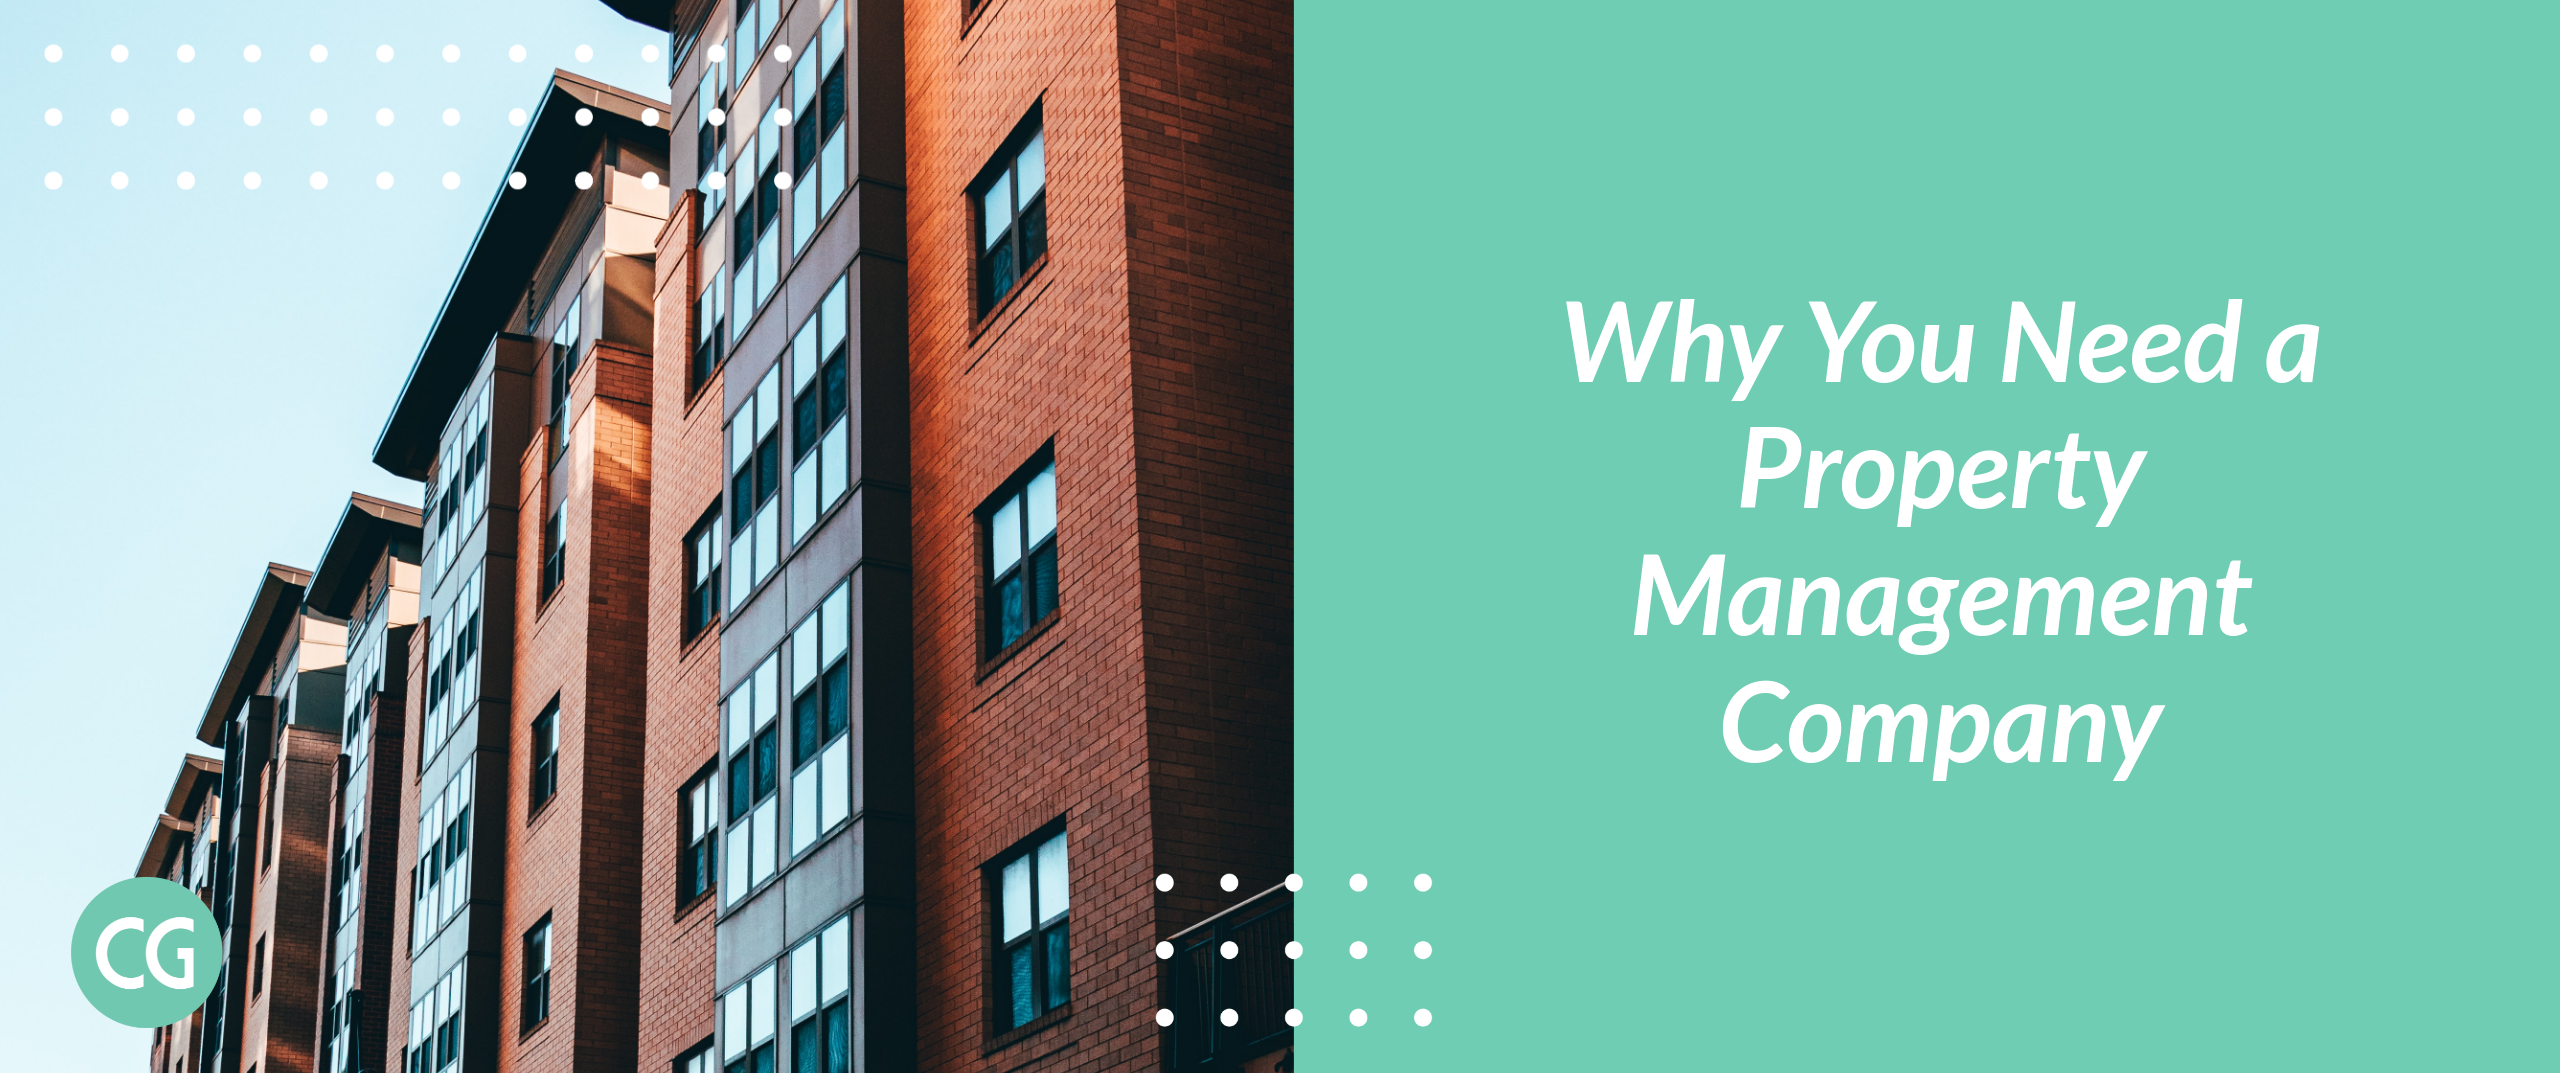 Why You Need a Property Management Company